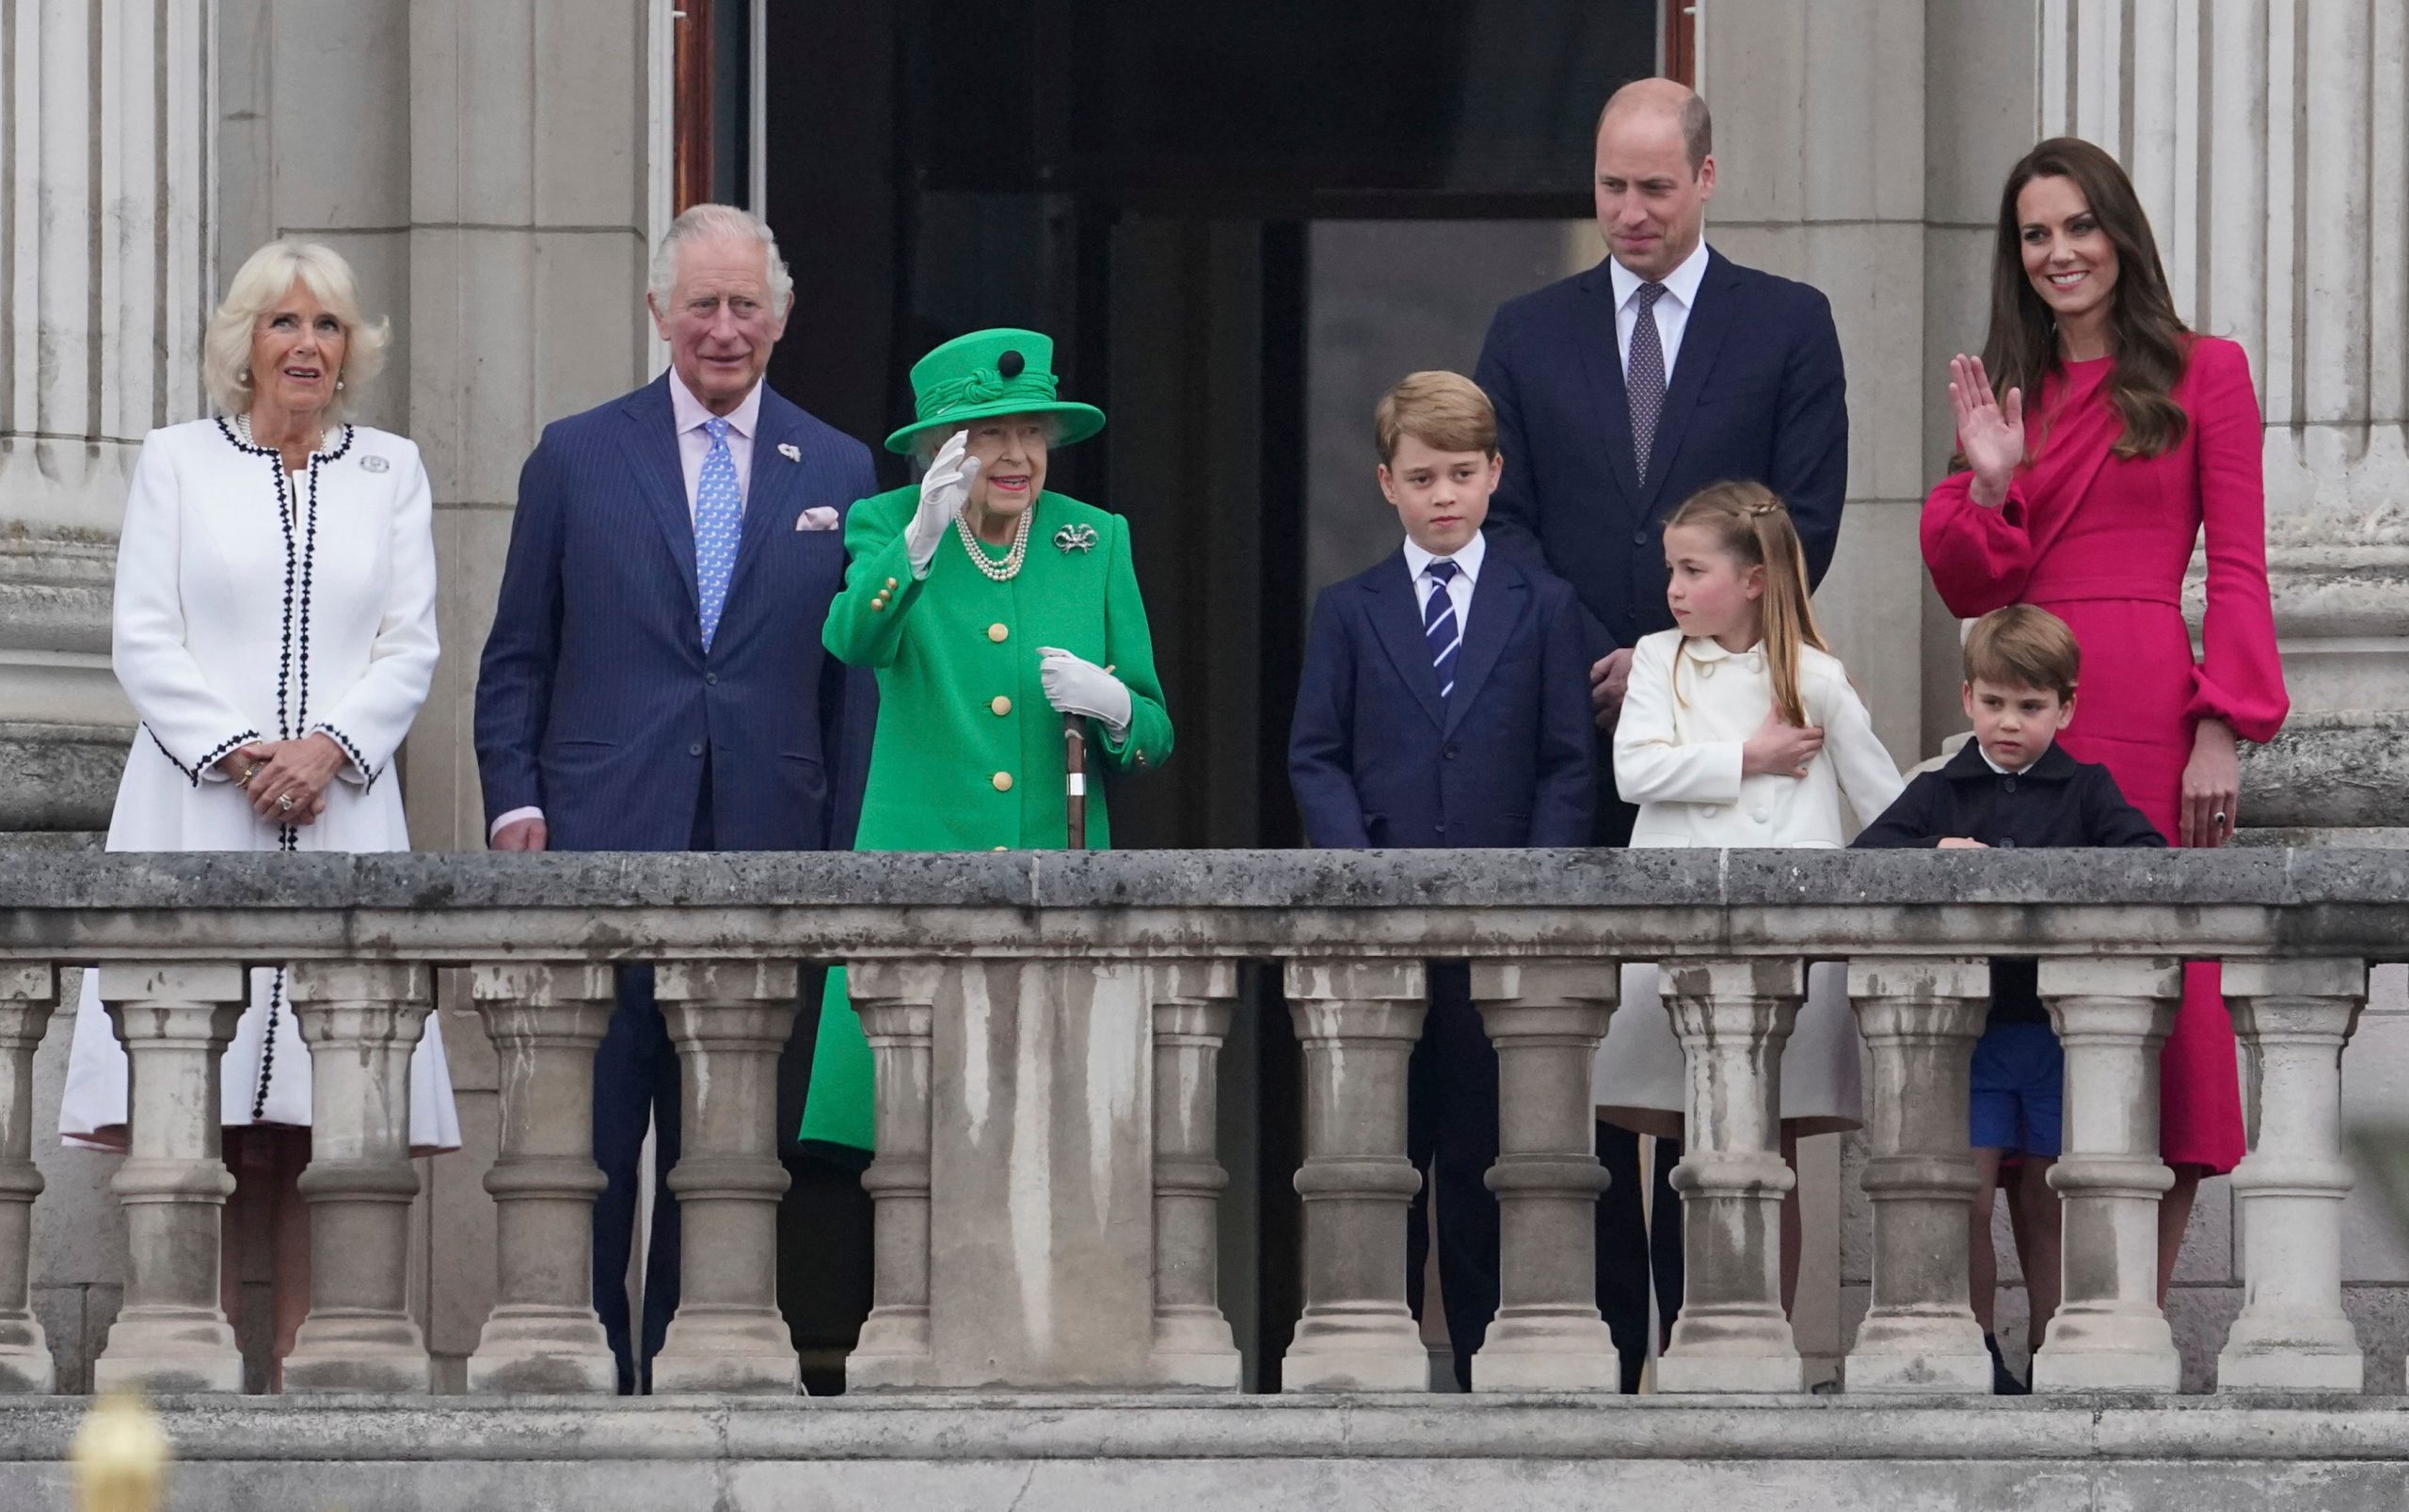 Next generation of the British Royal Family will see more scrutiny